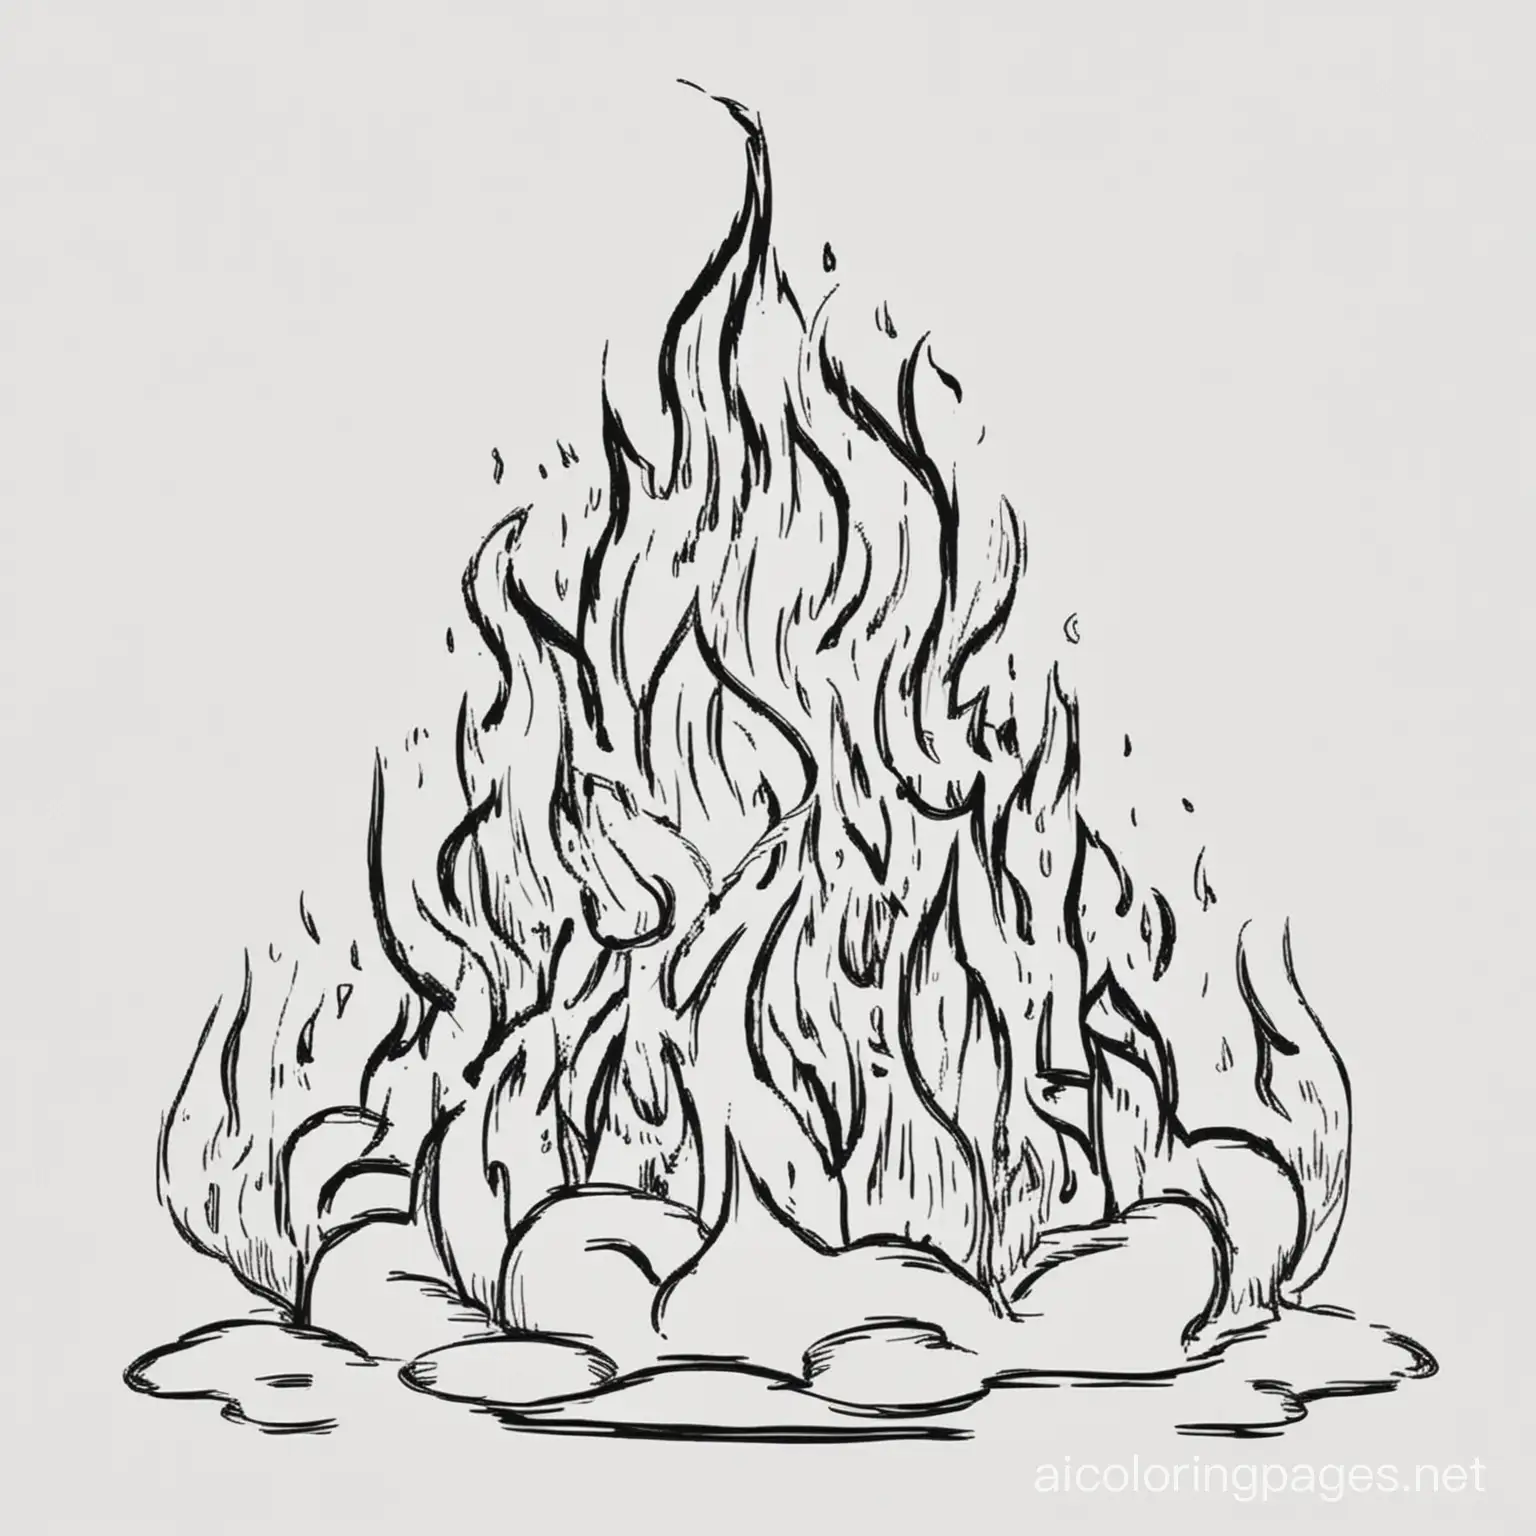 fire tornaeo

, Coloring Page, black and white, line art, white background, Simplicity, Ample White Space. The background of the coloring page is plain white to make it easy for young children to color within the lines. The outlines of all the subjects are easy to distinguish, making it simple for kids to color without too much difficulty